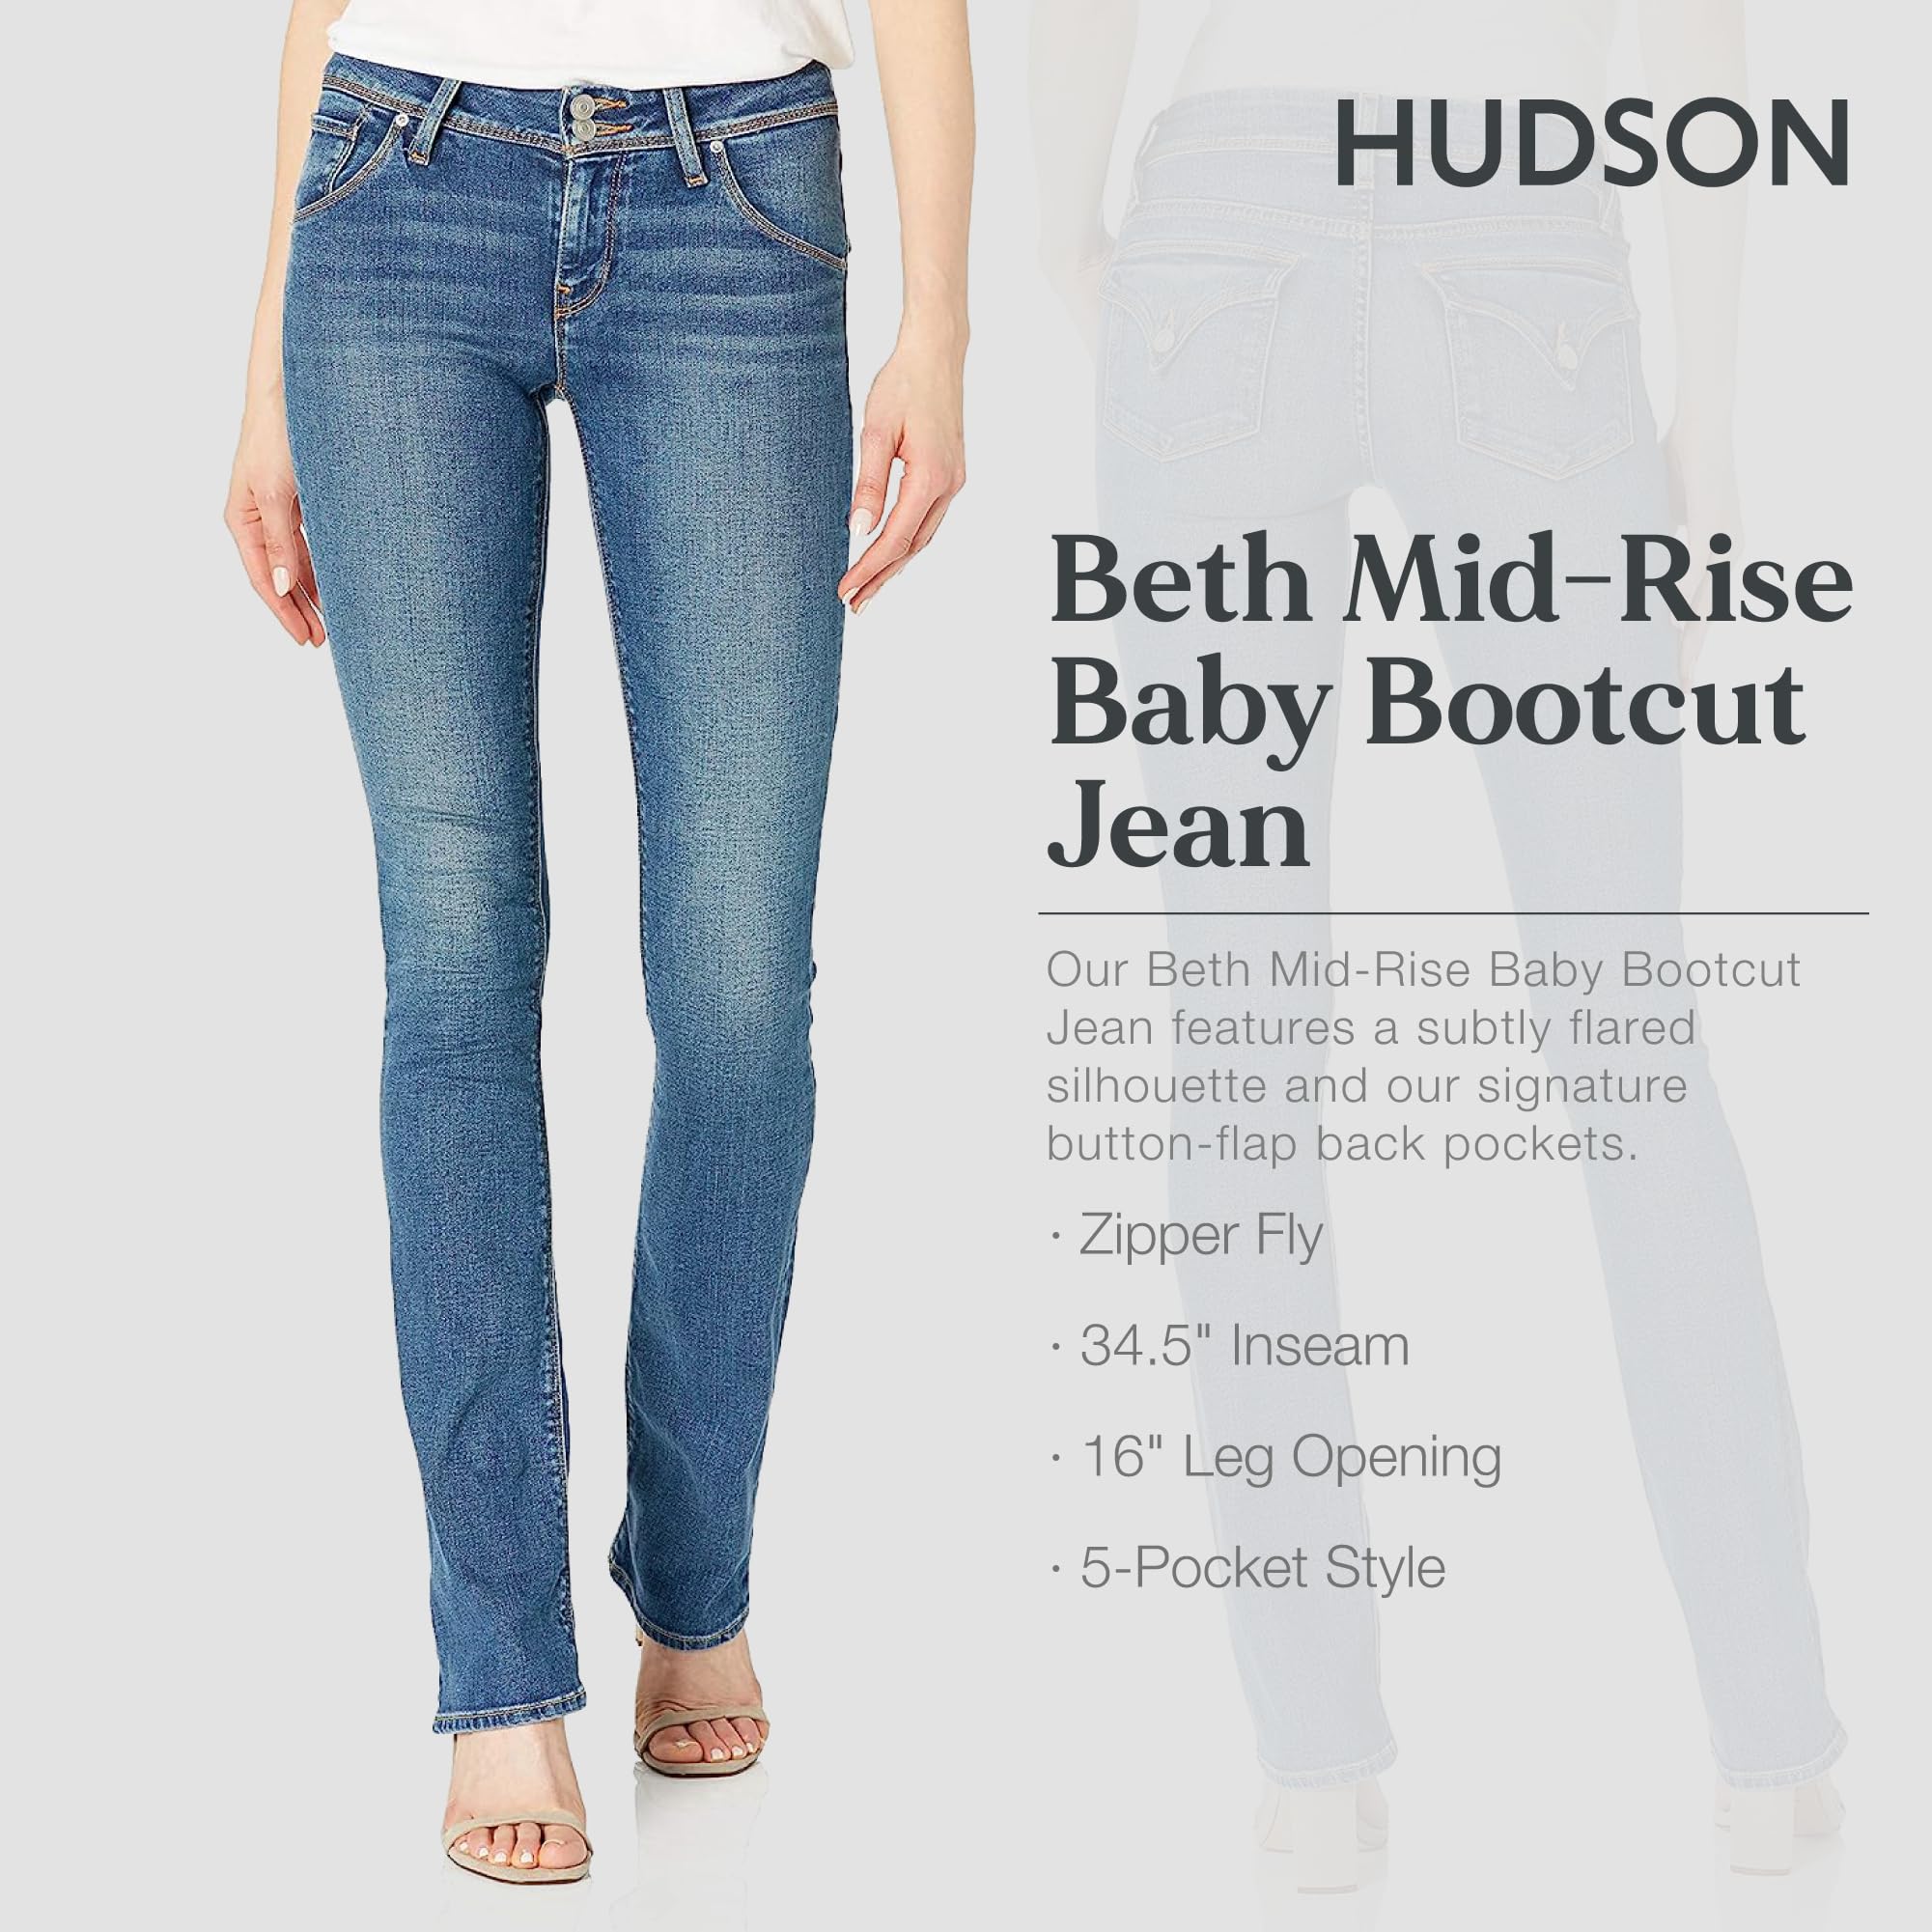 HUDSON Women's Beth Baby Bootcut Jean with Back Flap Pockets